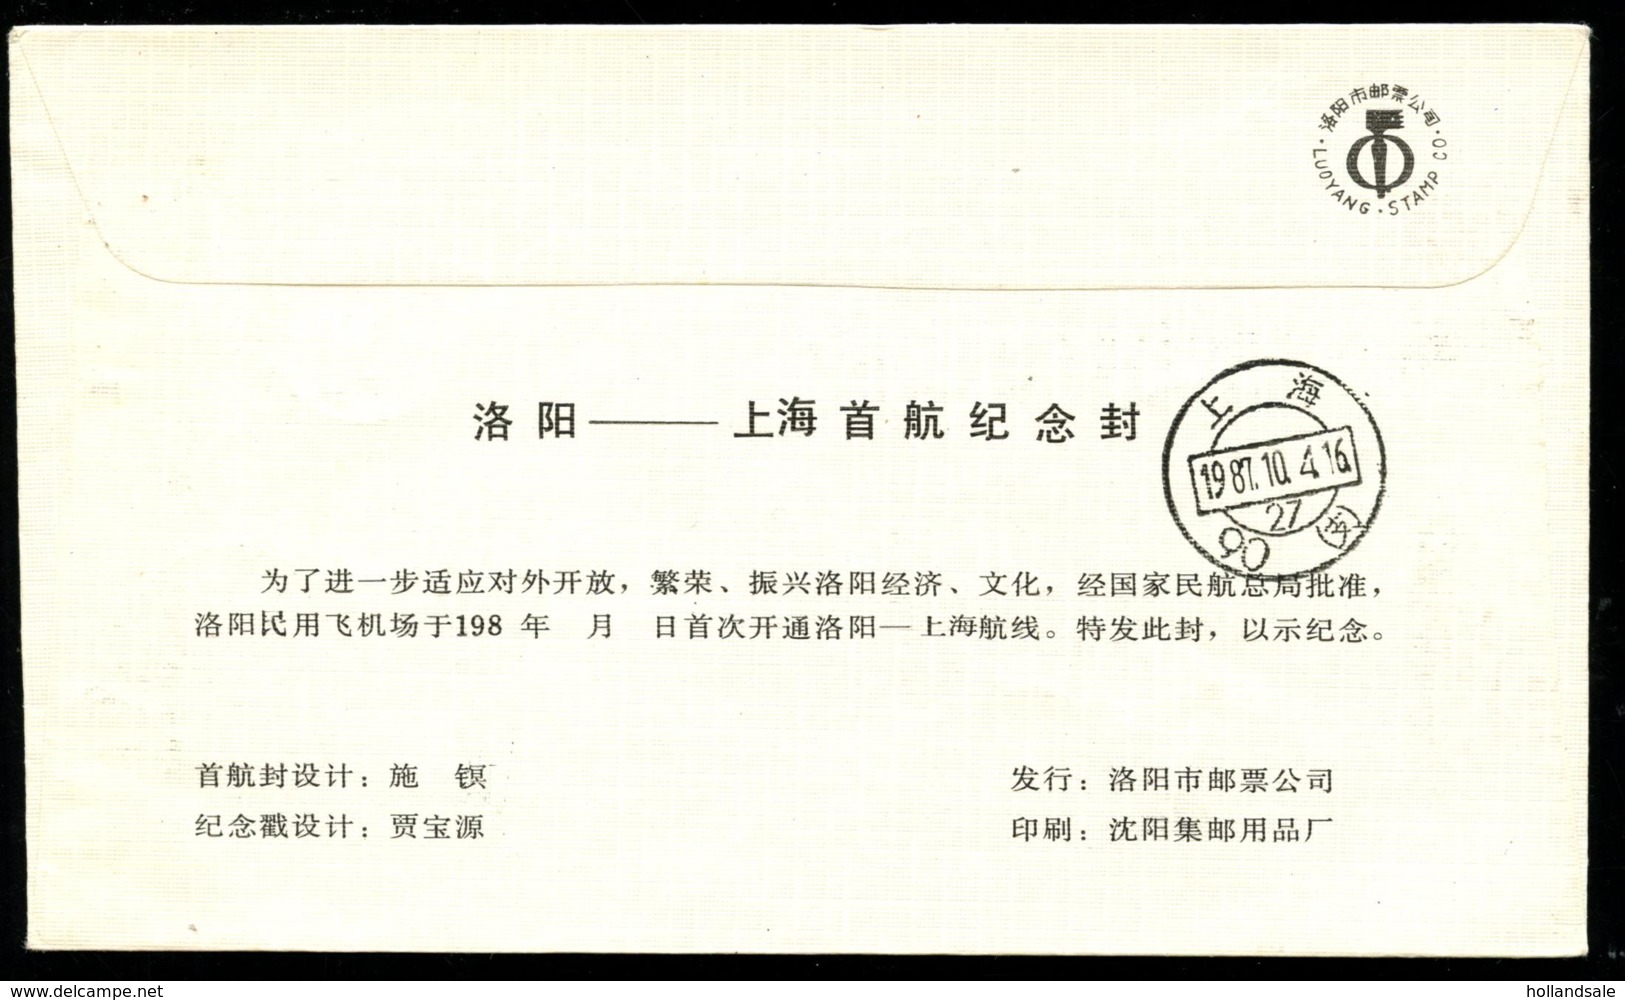 CHINA PRC - 1987 October 4   First Flight   Luoyang - Beijing. - Airmail